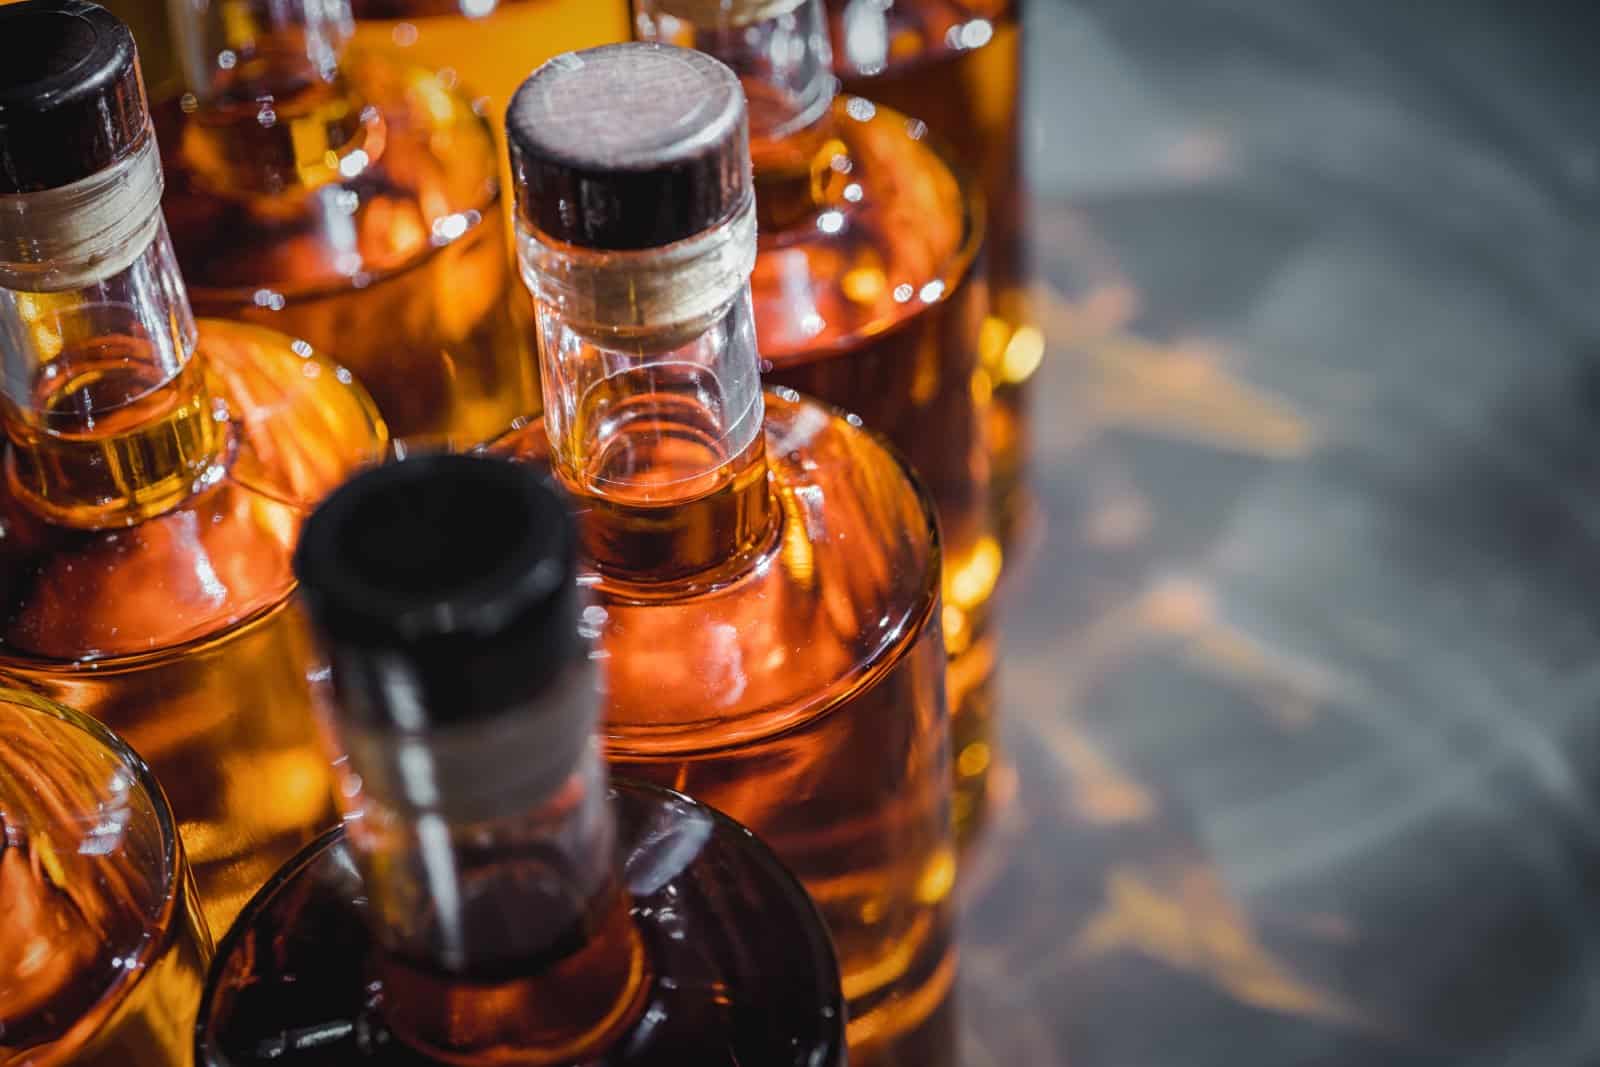 <p><span>While strictly regulated and illegal in some states, distilling your own spirits can be done with the right permits. Elsewhere, homemade hooch is often a no-go.</span></p>